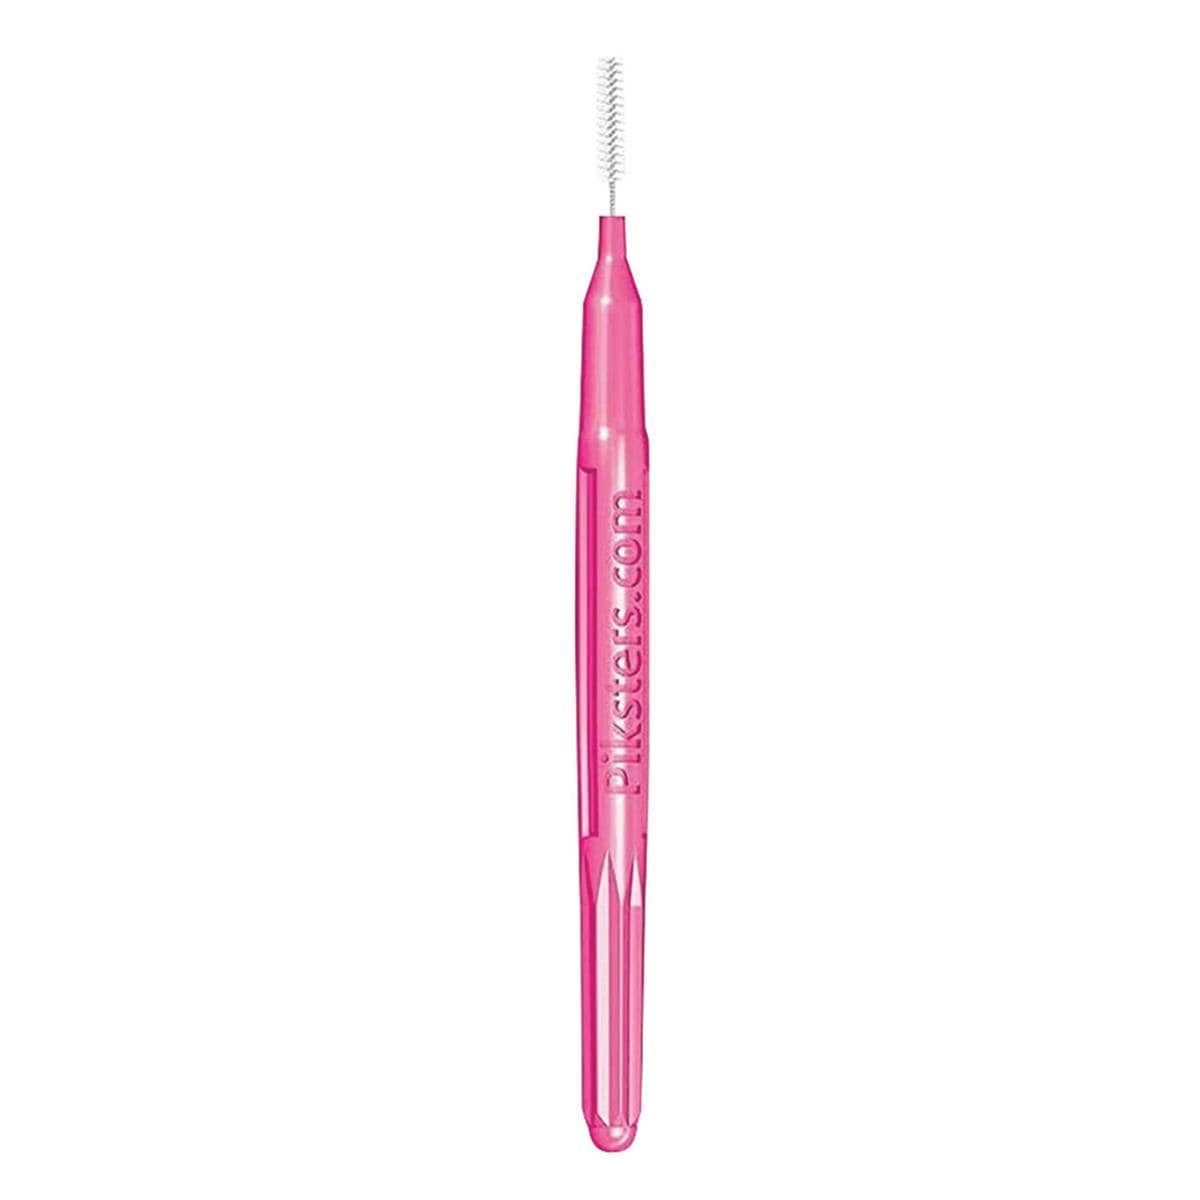 Acclean Interdental Angle Brush Size 00 Pink 35pk (ISO 0 - Wire 0.32 - PHD 0.6mm)